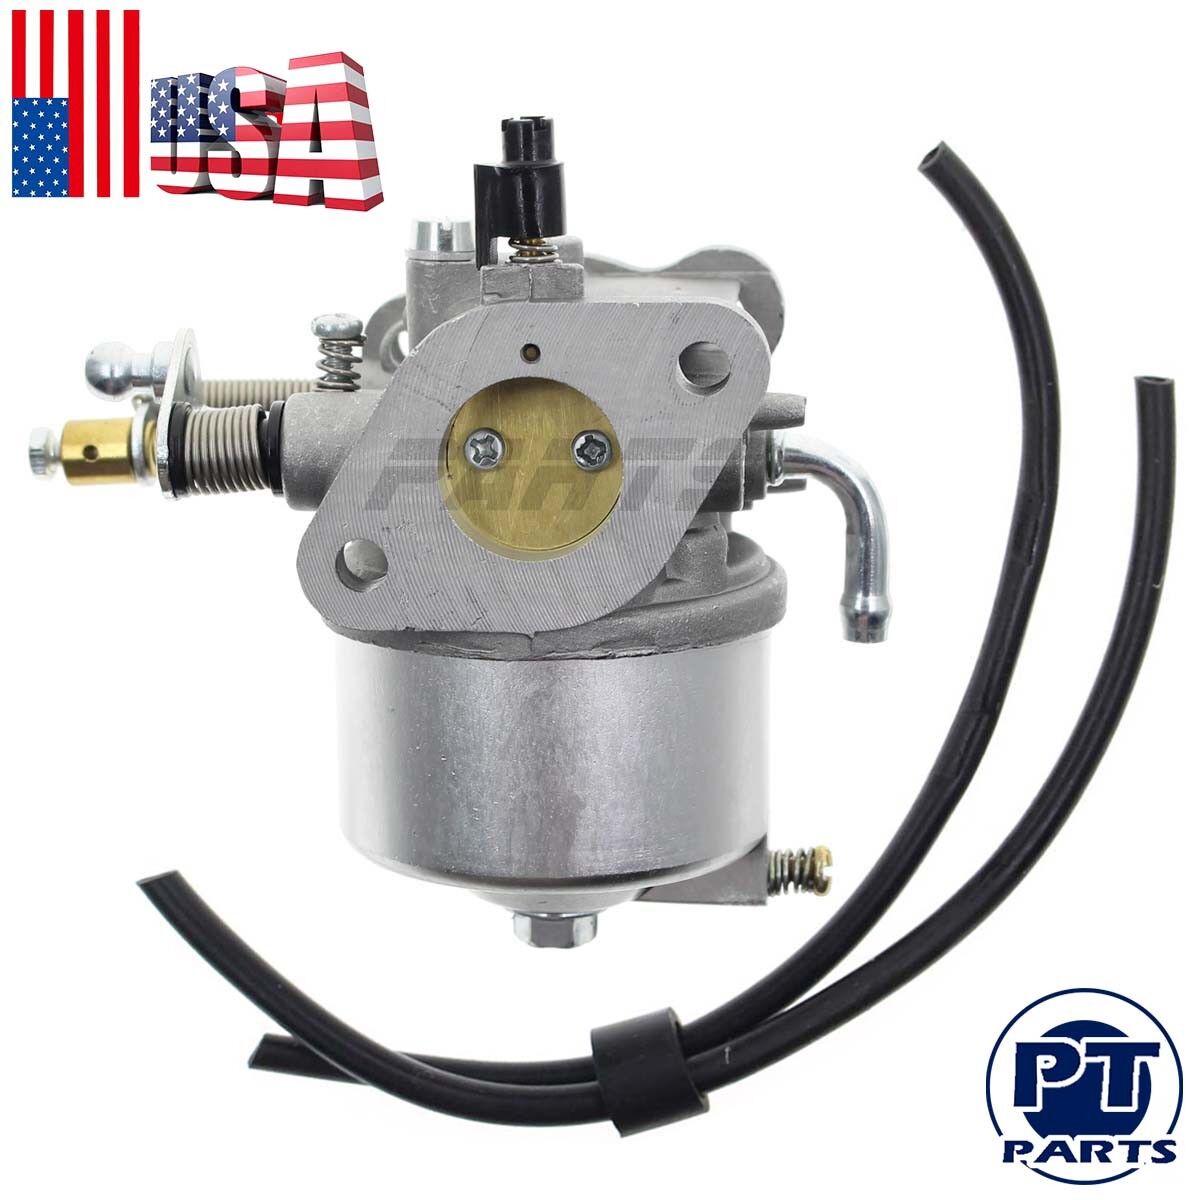 FOR Ezgo Golf Cart Carburetor Assembly For 4 Cycle 295cc Engines CARB-011A 17553